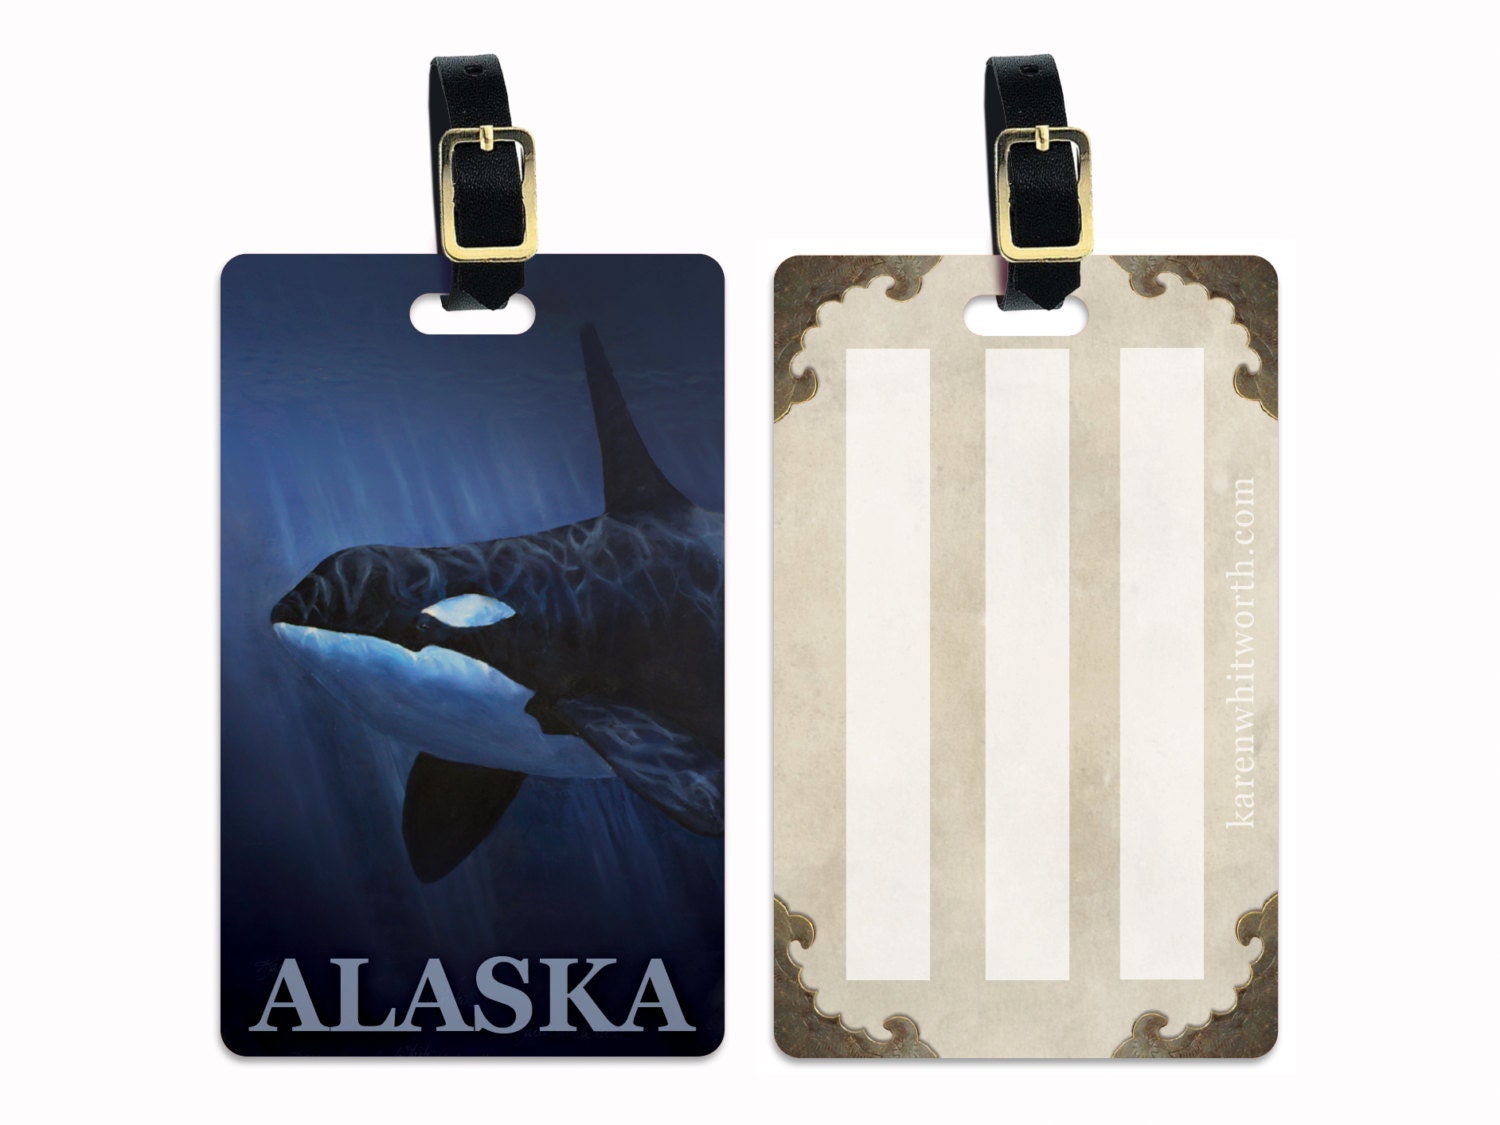 Sea Life Dolphin Leather Luggage Tag in Boho Style with Name Plate Bag Tag Gift for Men Women Ocean Beach Lover 